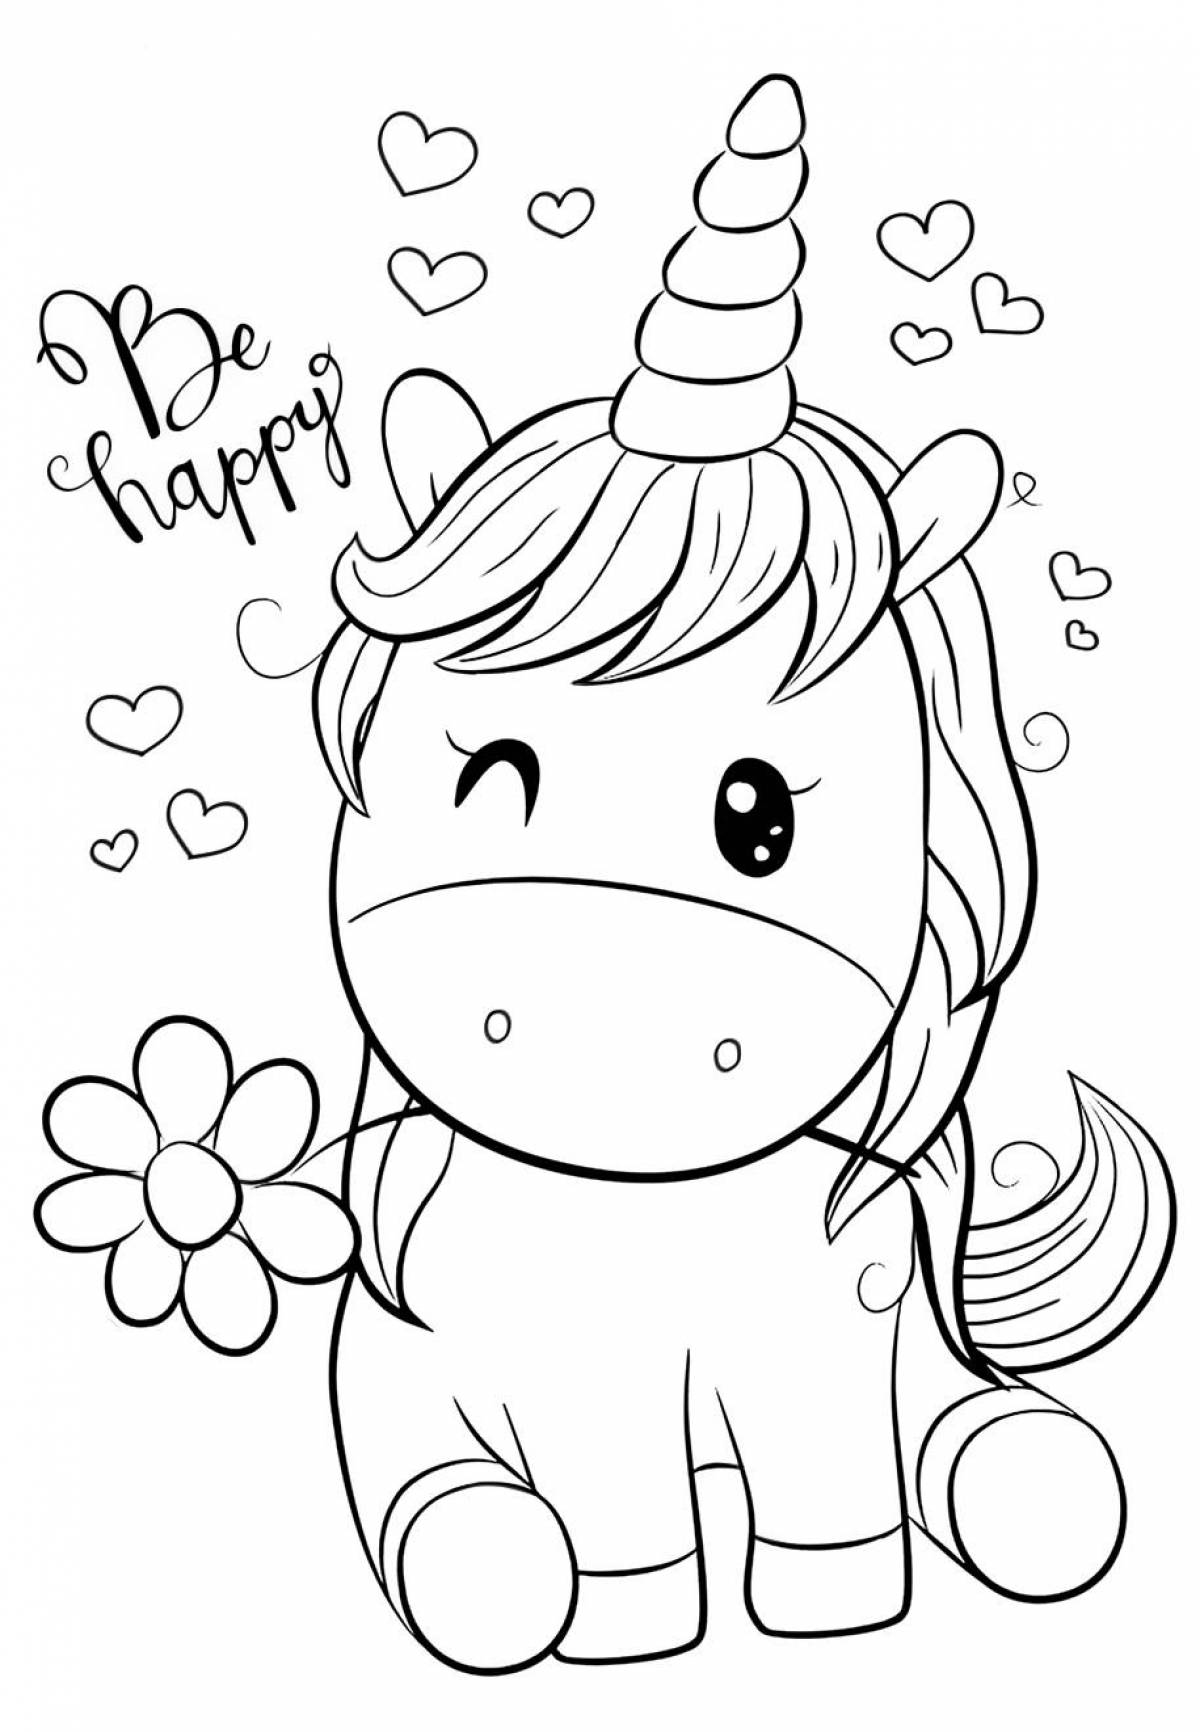 Fine unicorn coloring pages for girls